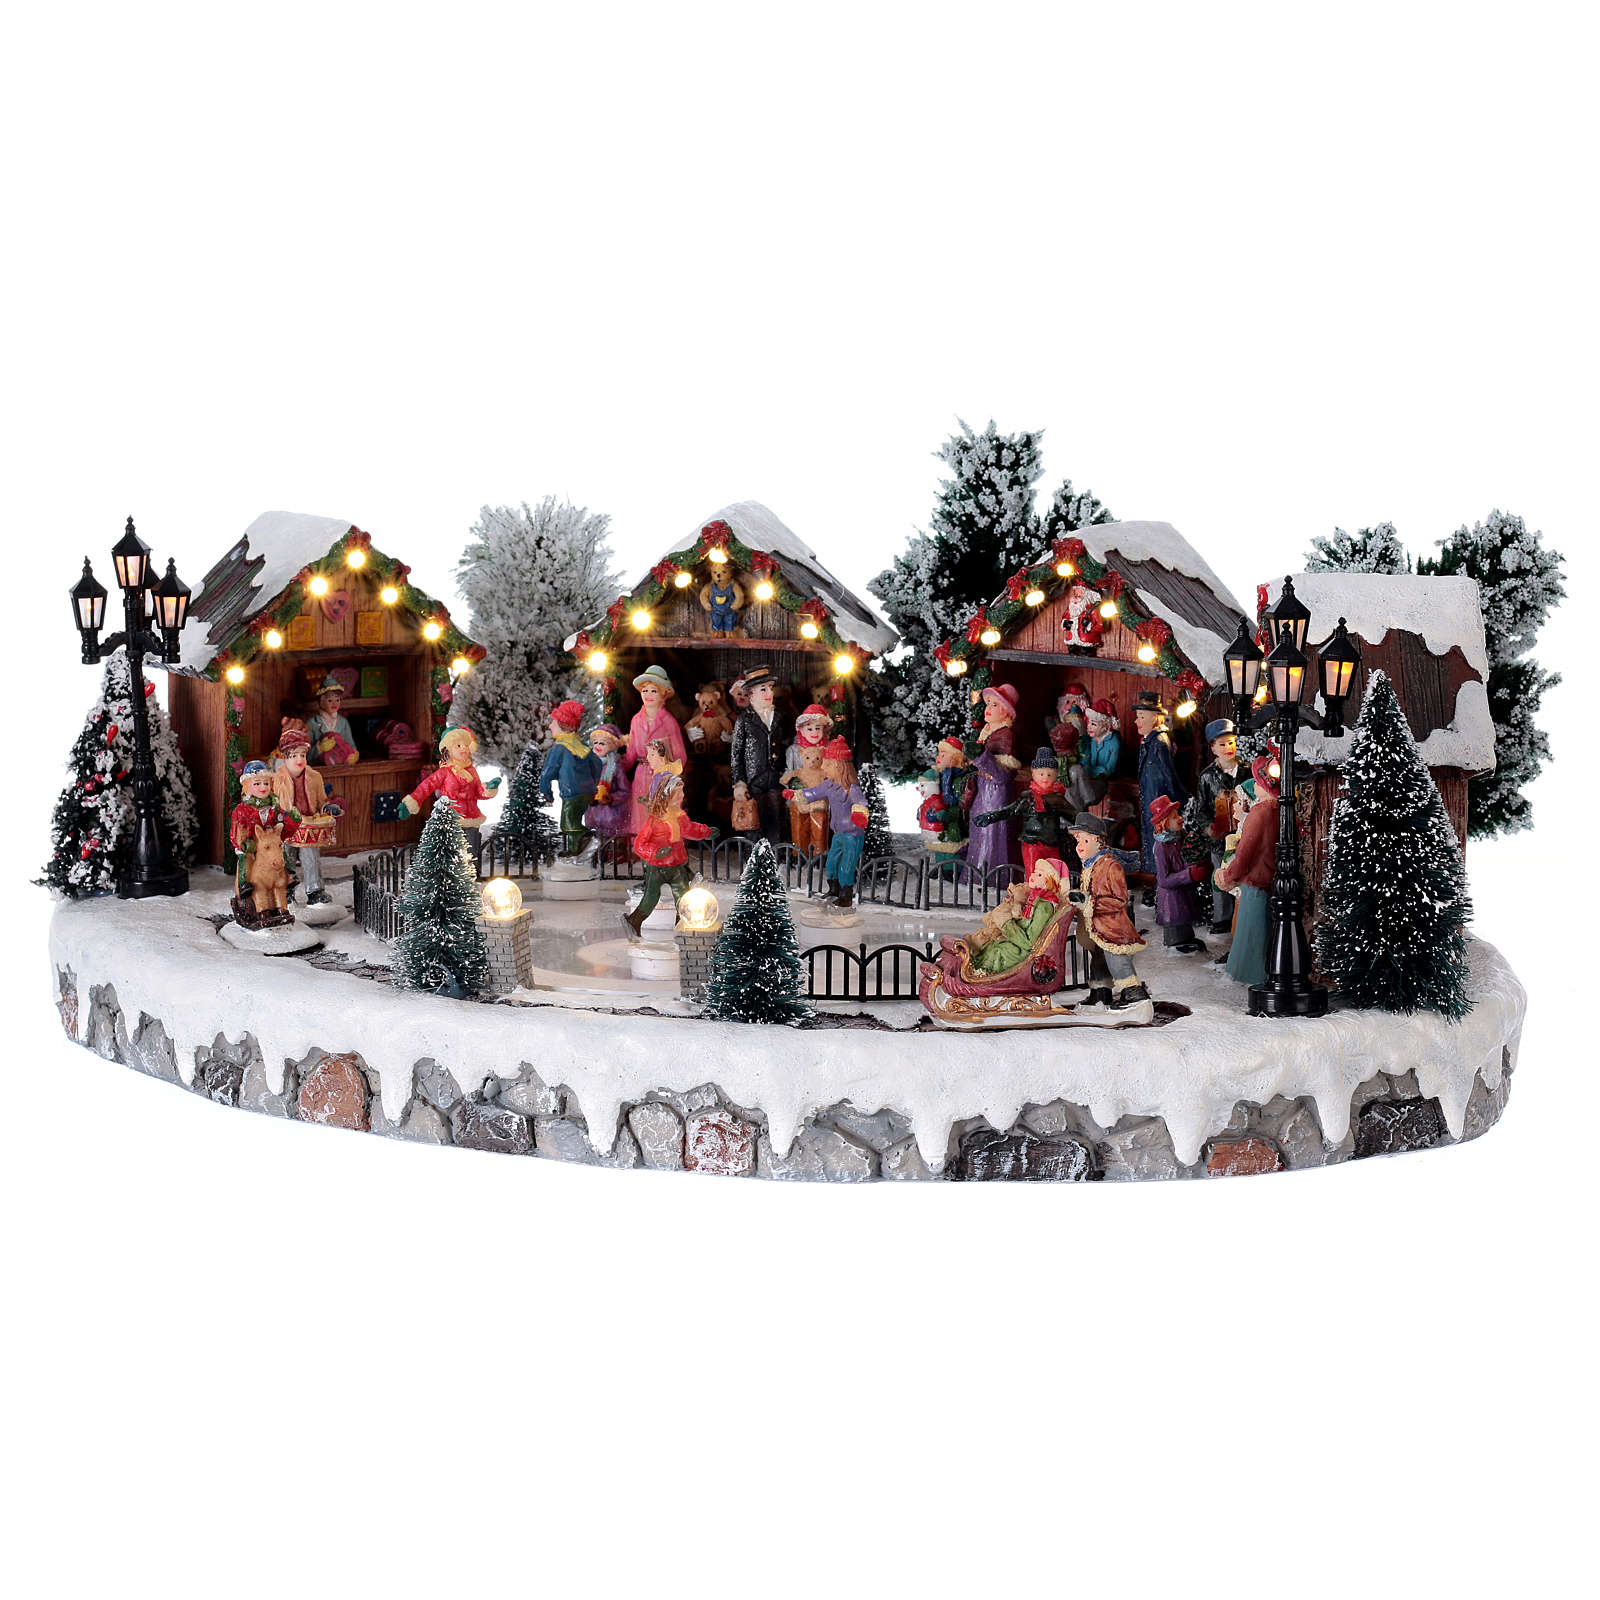 Christmas village with animated ice skaters and music | online sales on